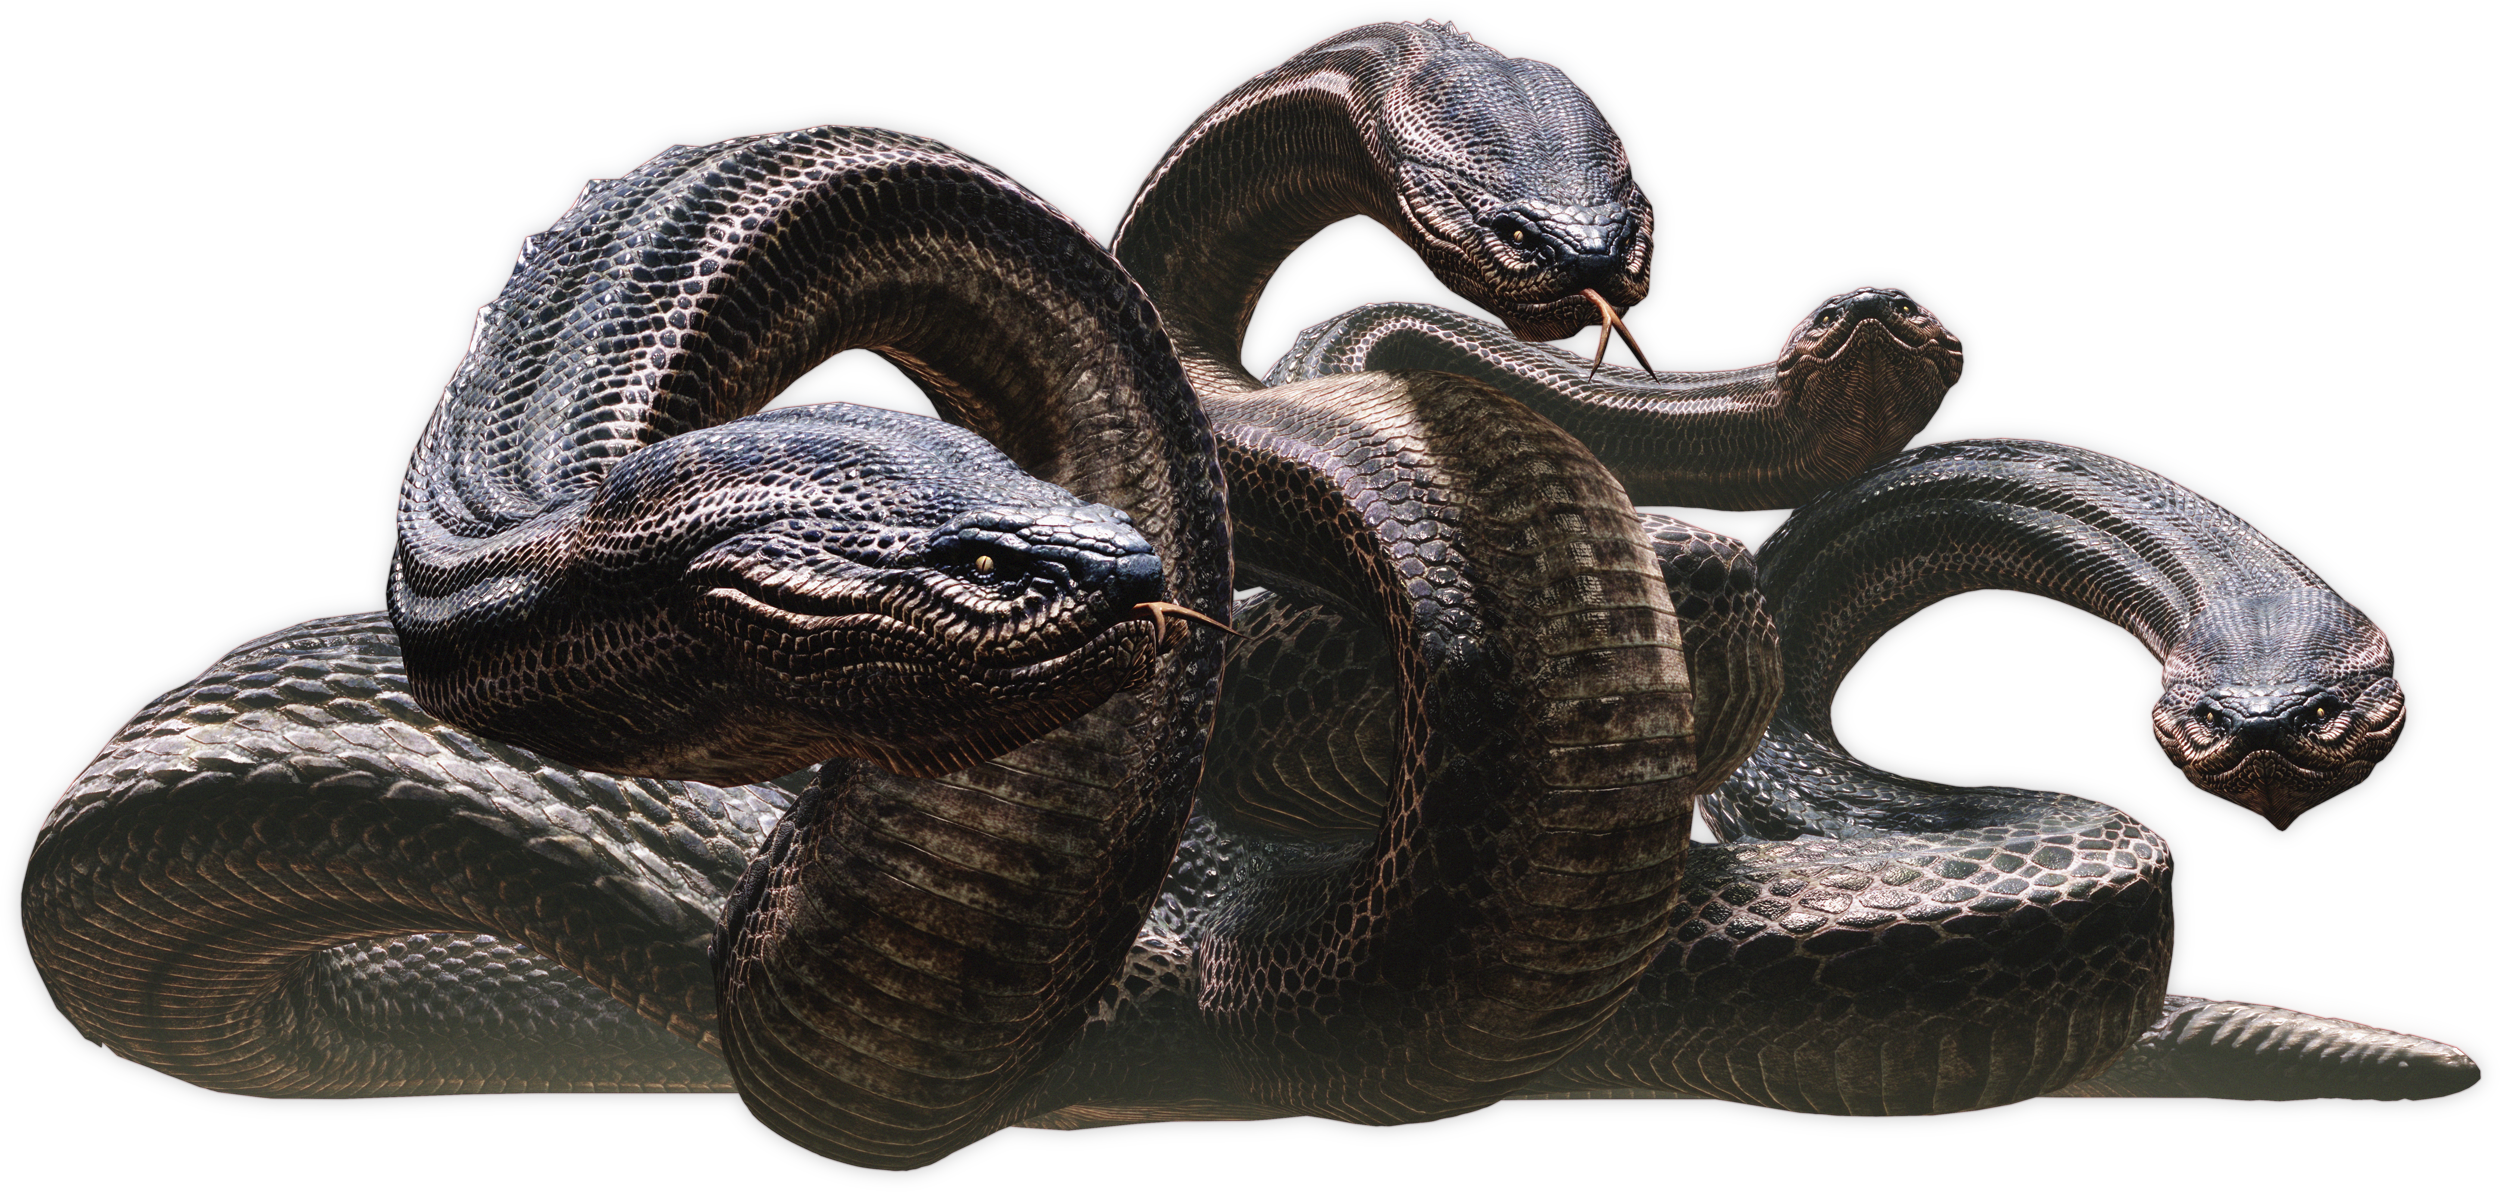 Dragons dogma hydra maximizing tor browser can allow websites to determine hidra